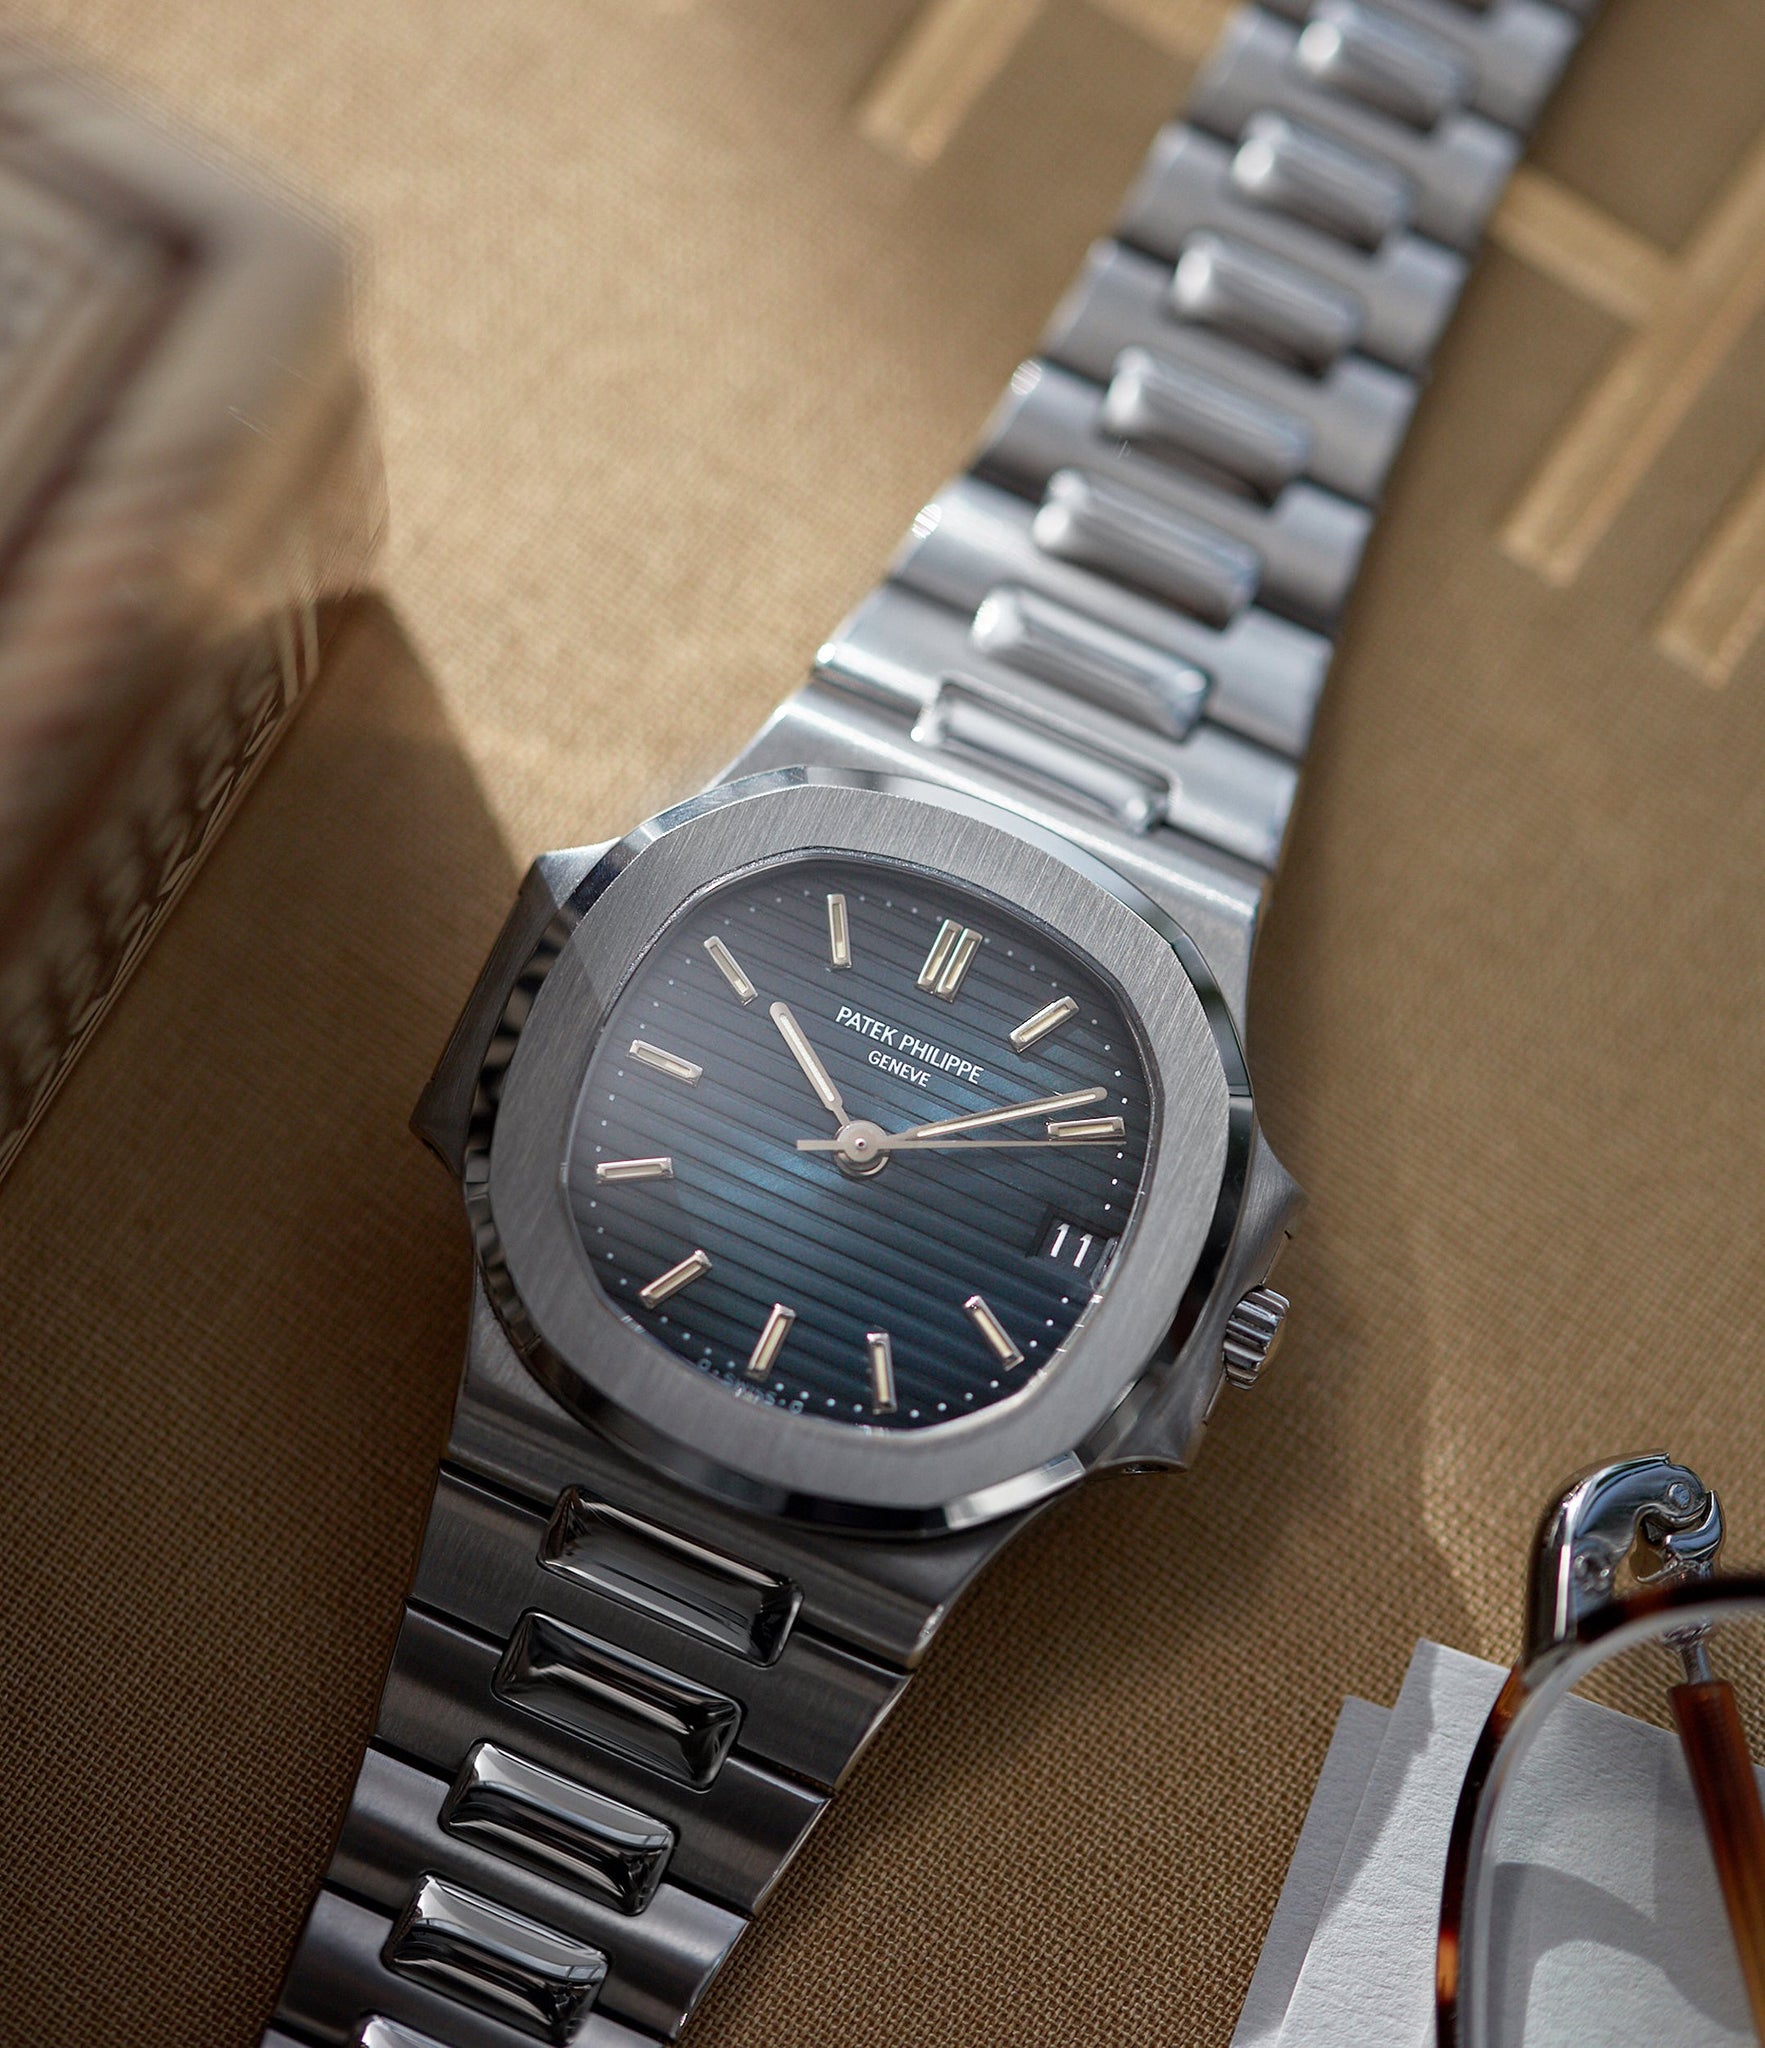 shop pre-owned Patek Philippe Nautilus 3800/1 steel luxury sports watch for sale online A Collected Man London UK specialist of rare watches